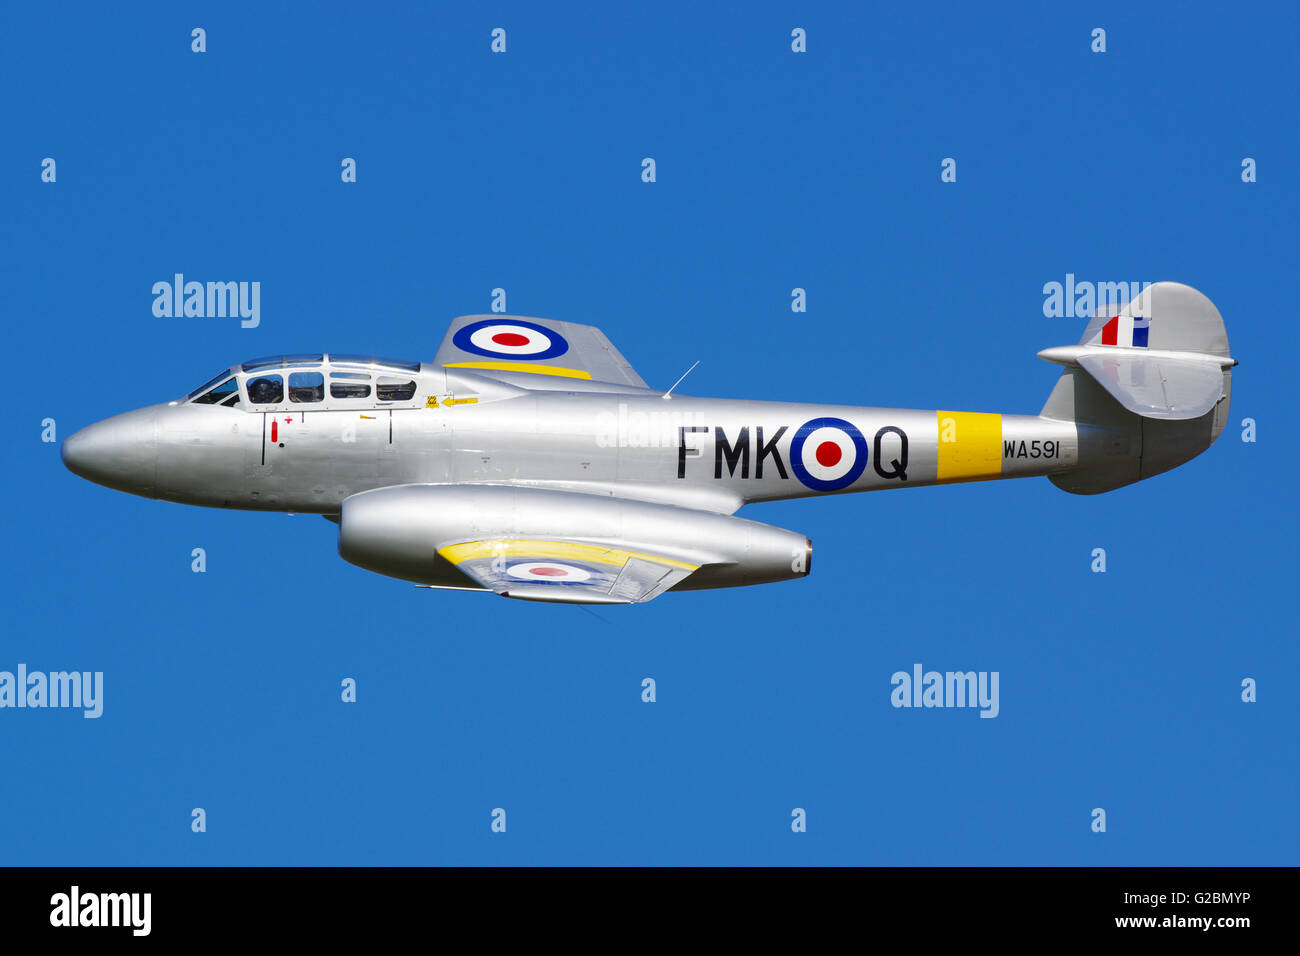 Gloster Meteor WA591, Banque D'Images